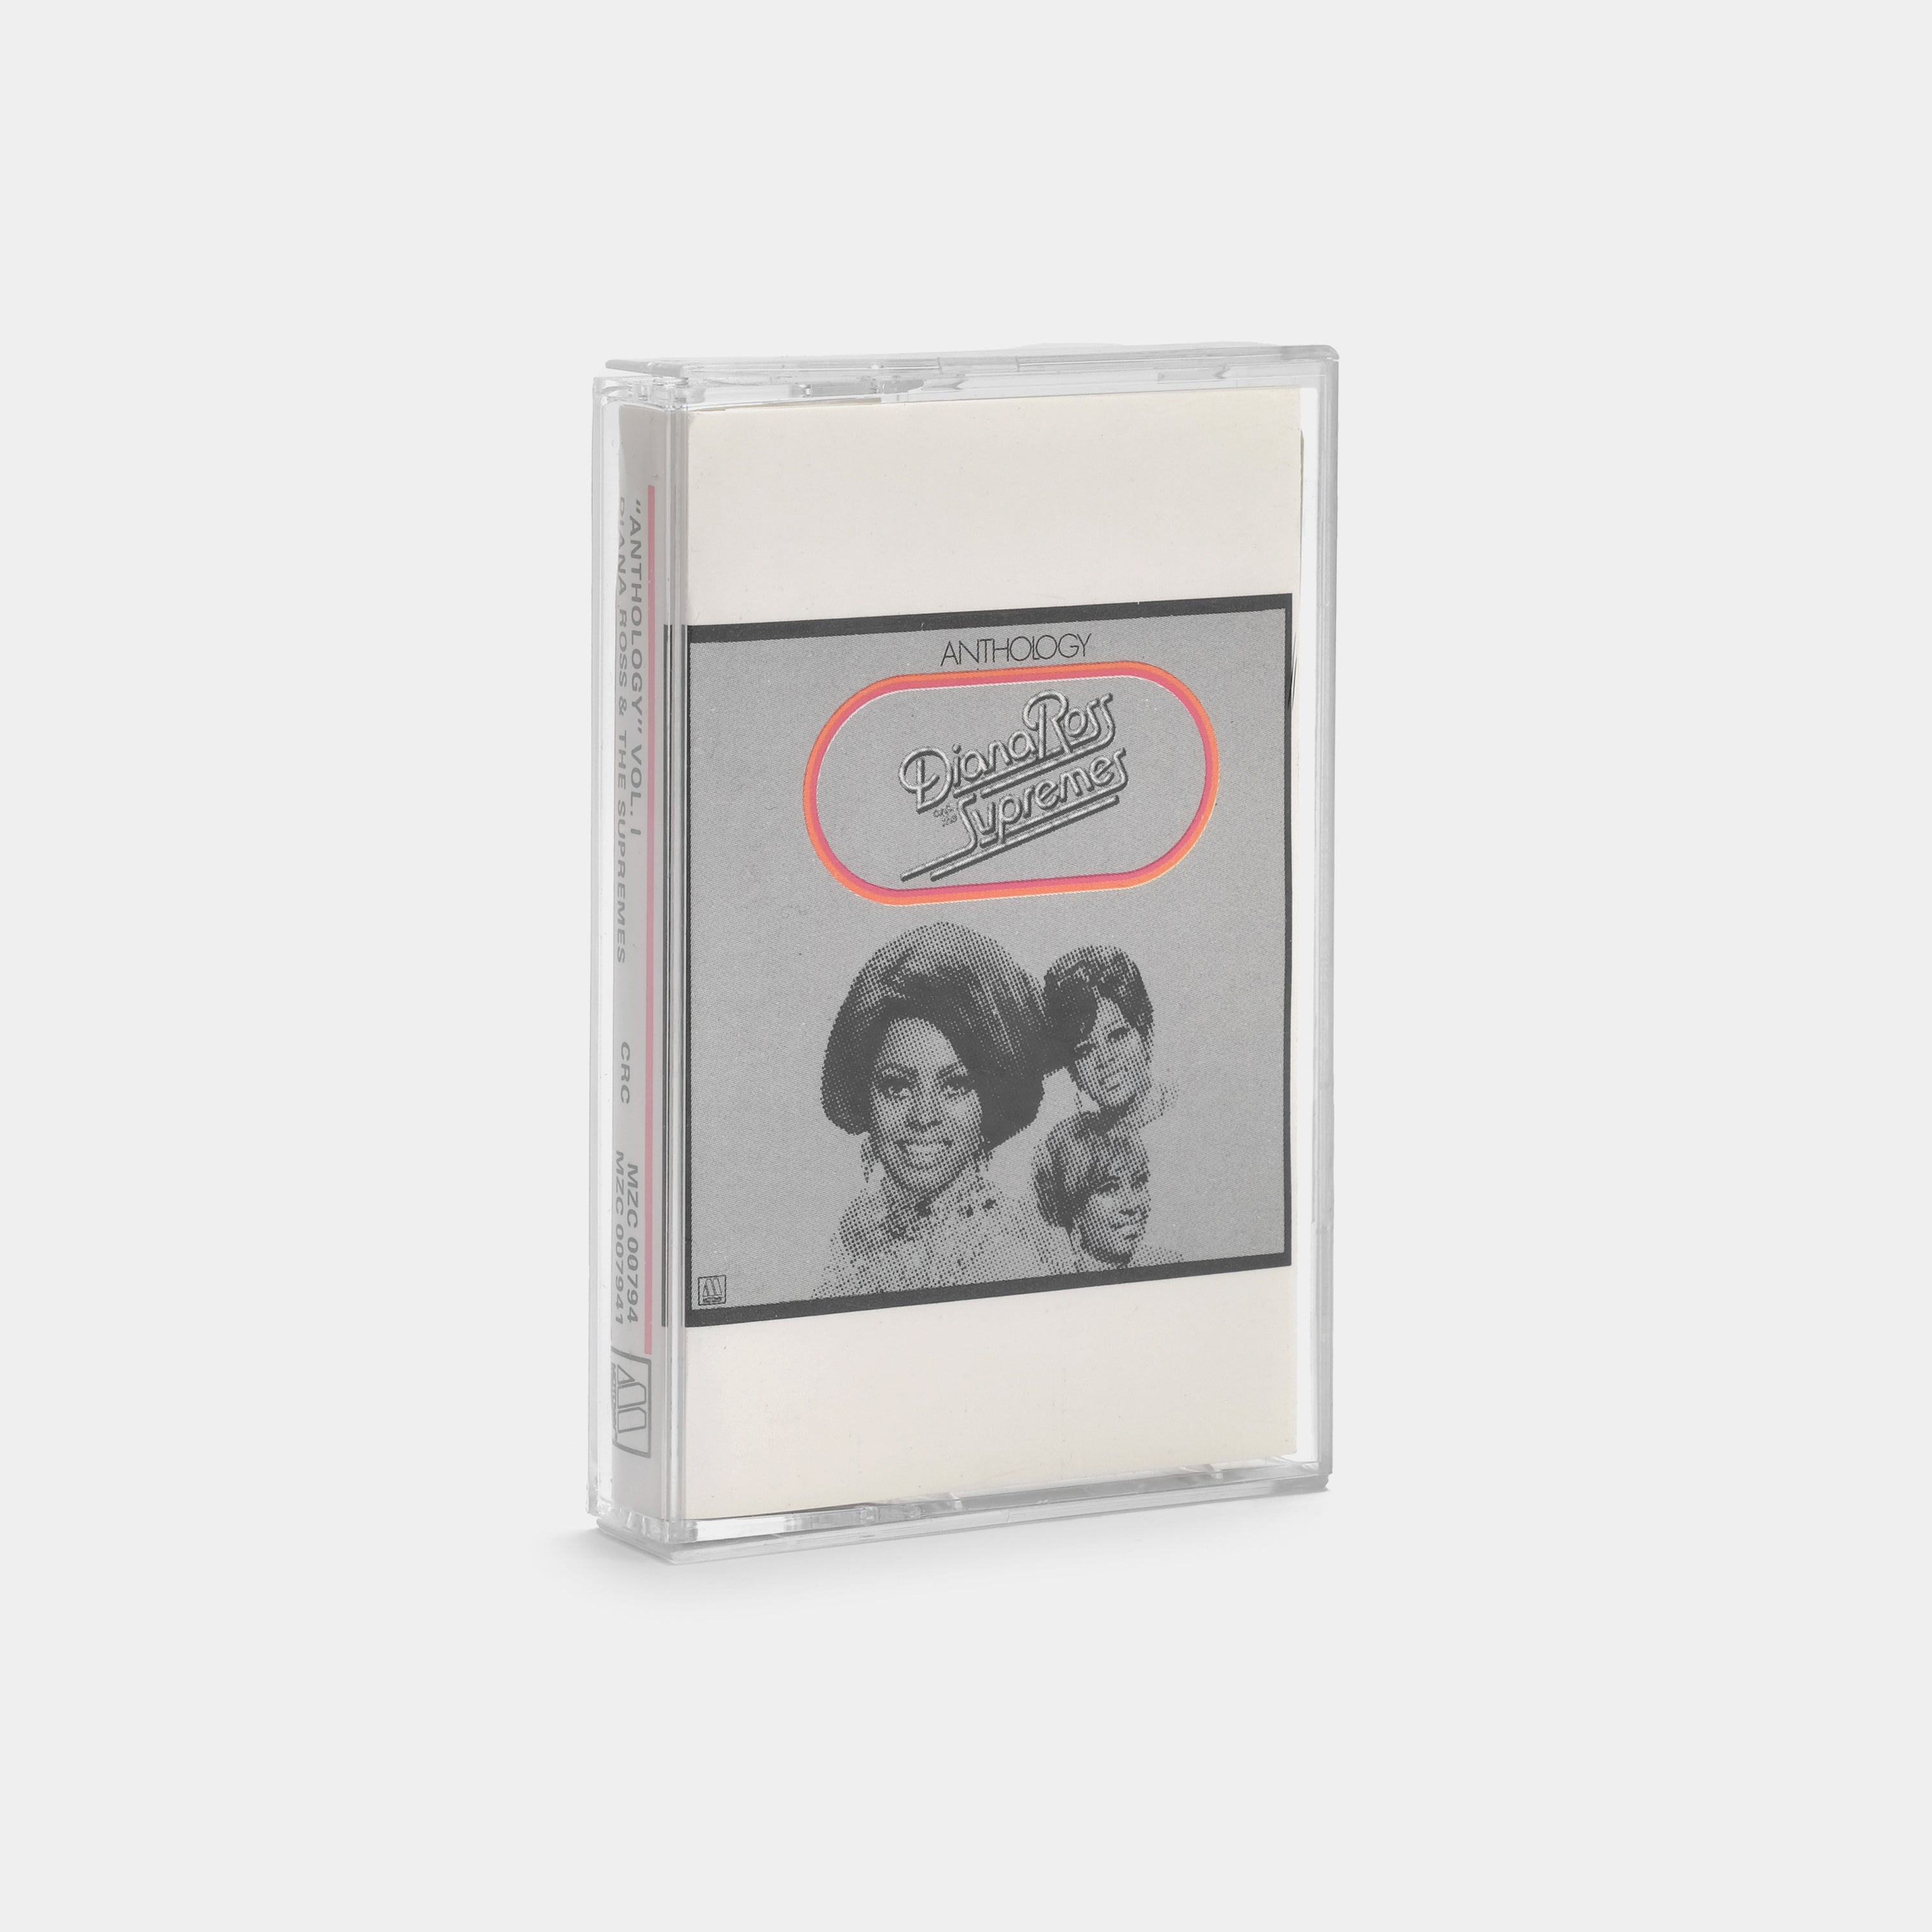 Diana Ross And The Supremes - Anthology Vol. 1 Cassette Tape